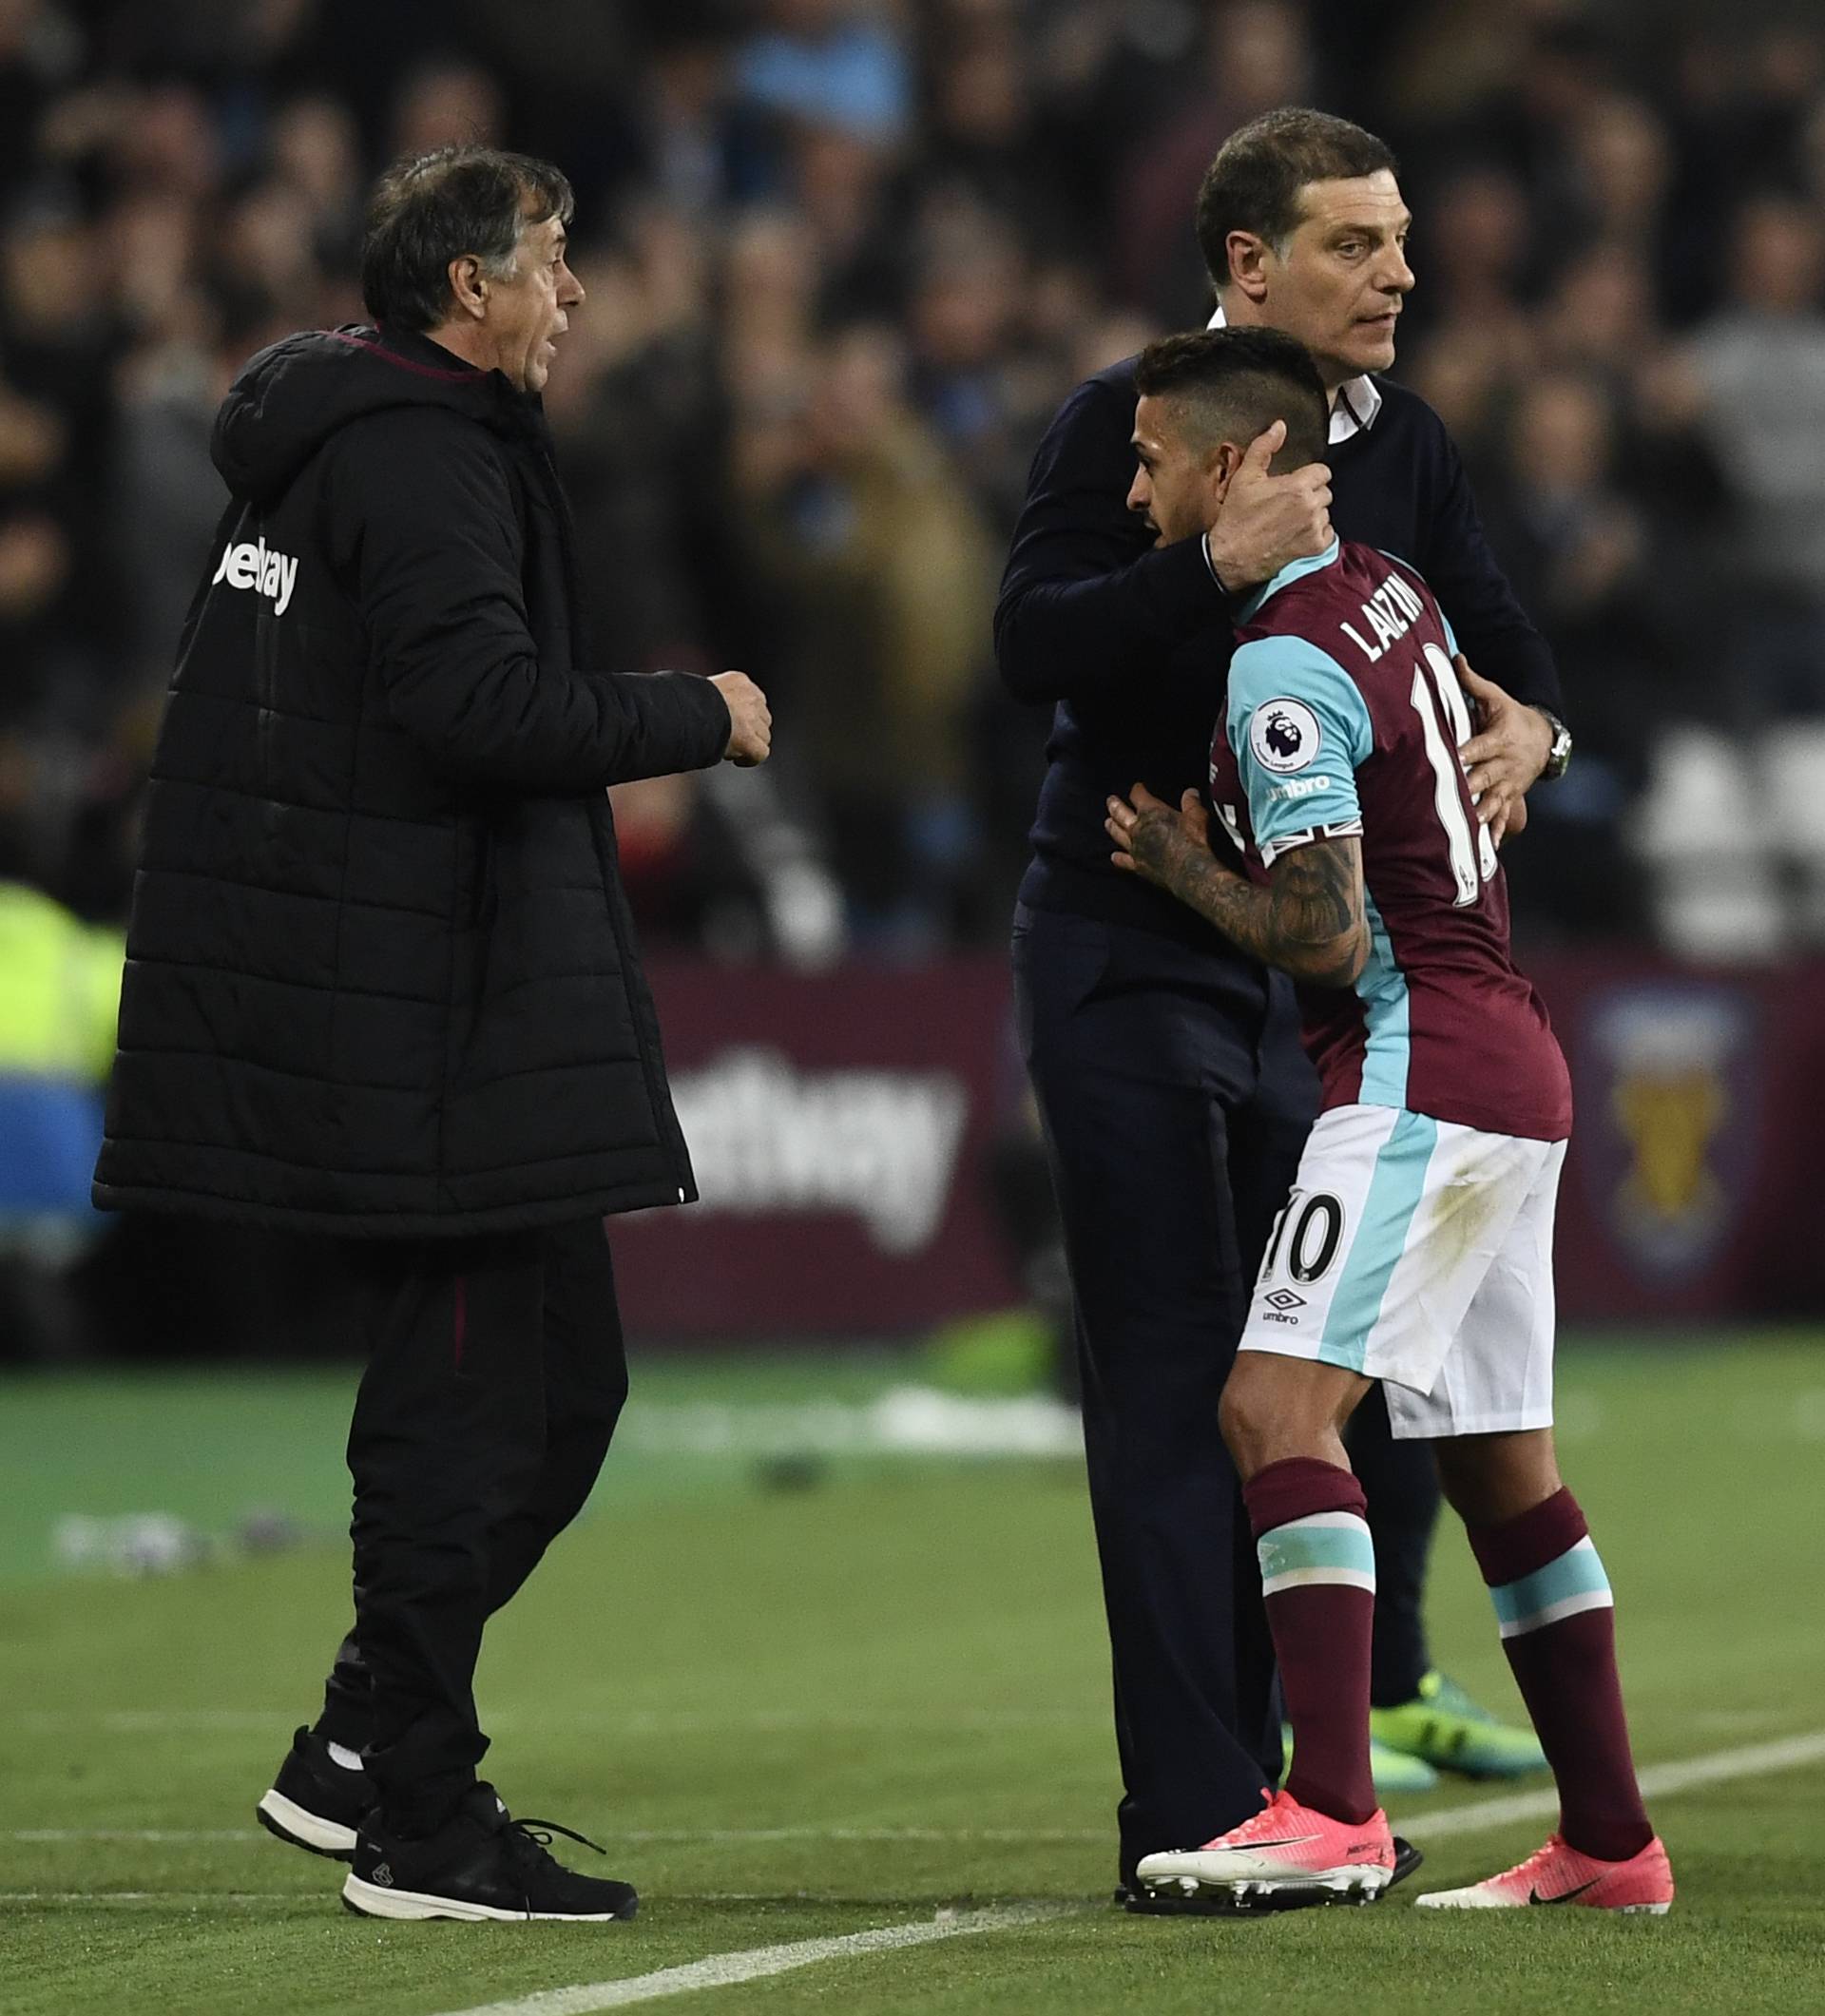 West Ham United's Manuel Lanzini with West Ham United manager Slaven Bilic after being substituted